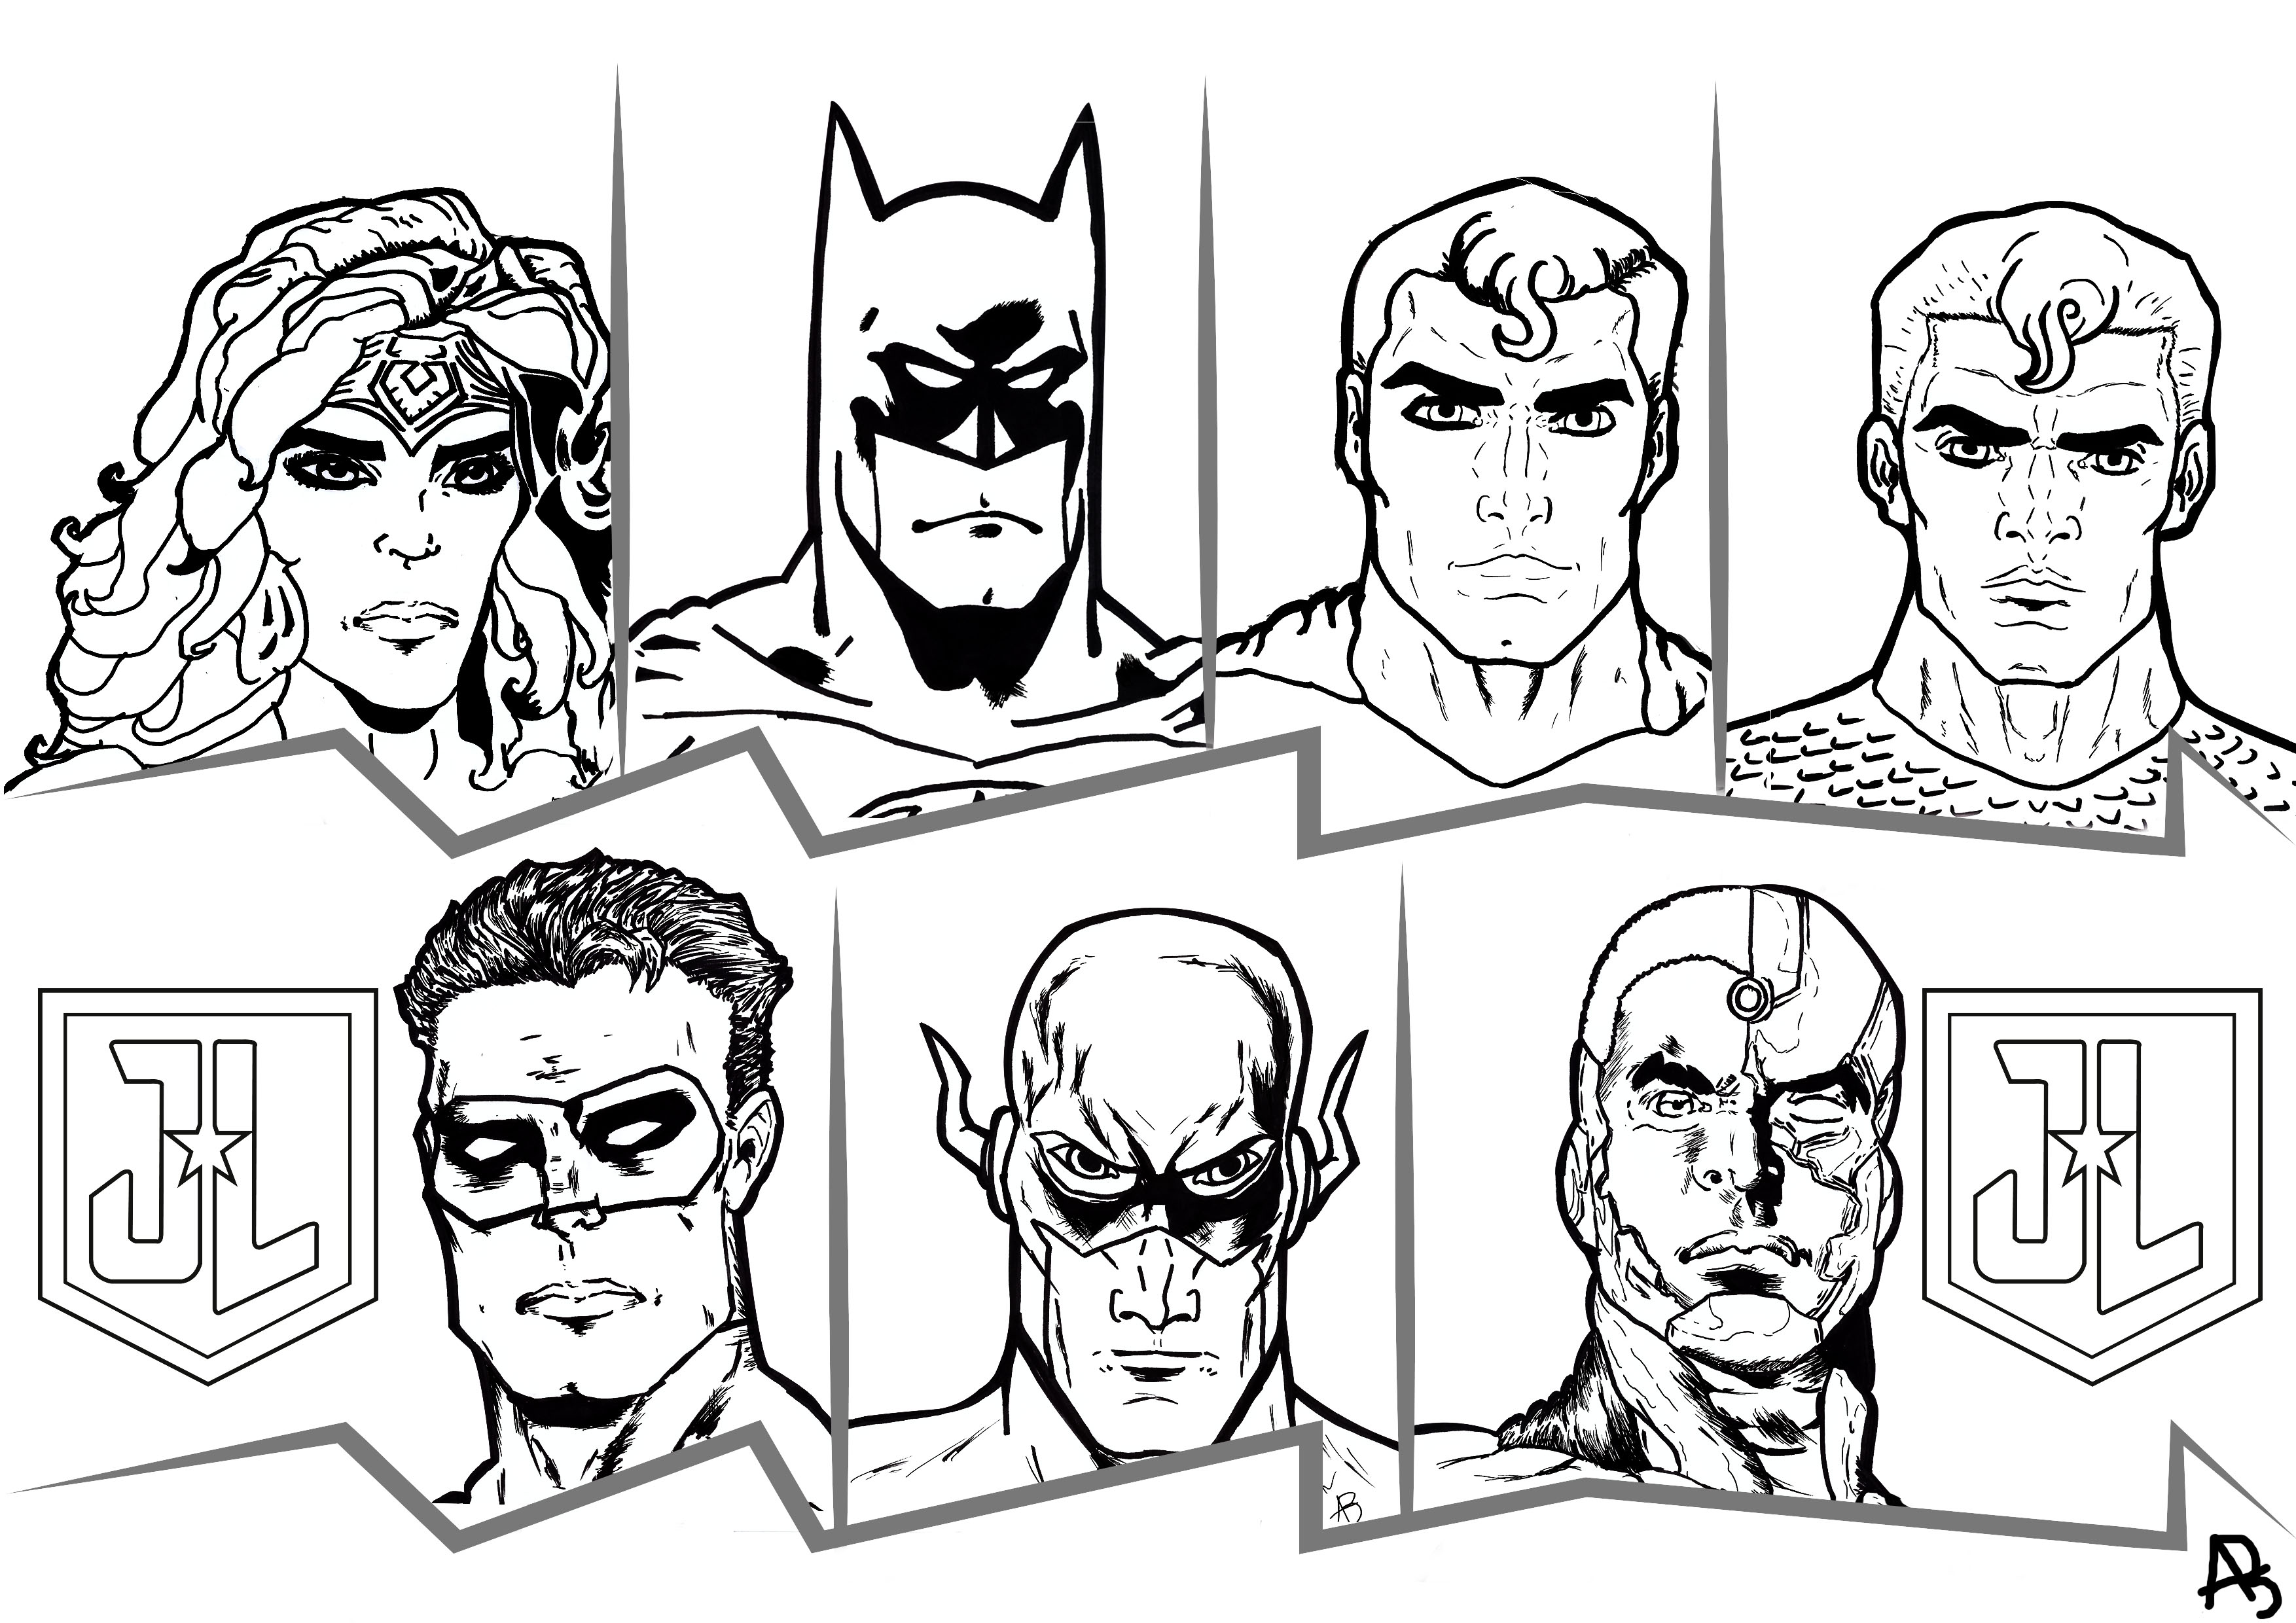 The Justice League movie was released in 2017, for this occasion we created an original coloring page, Artist : Allan